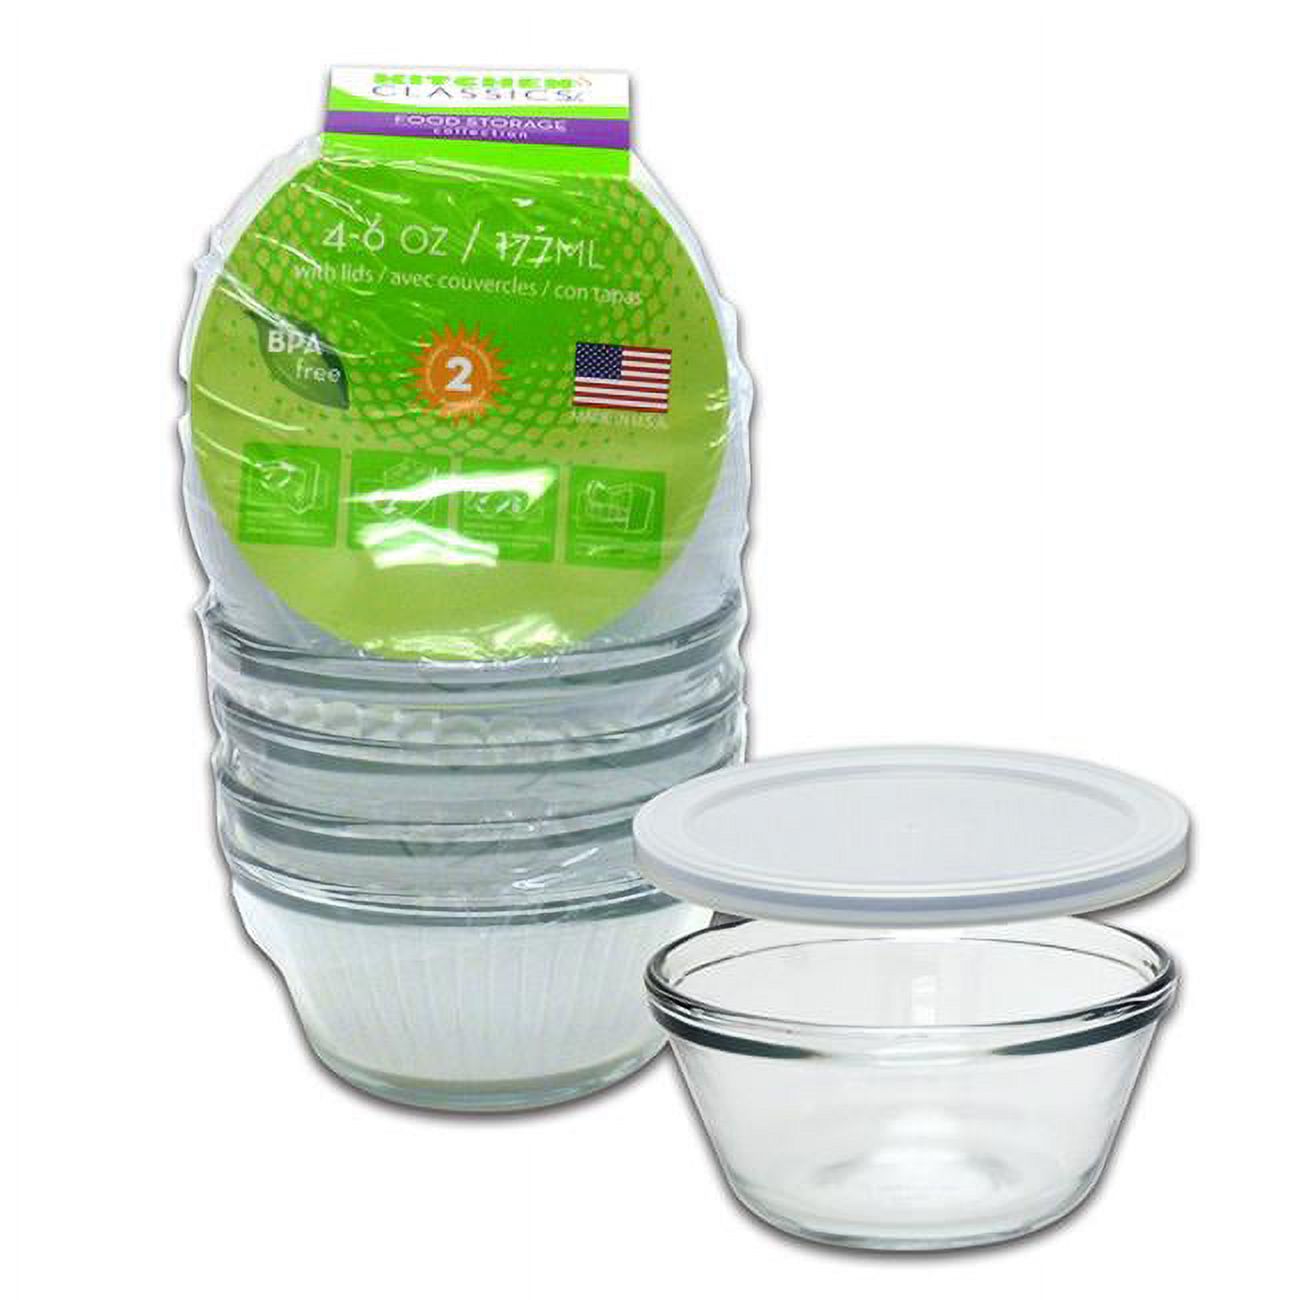 Libra Wholesale 6565410 6 oz Food Storage Container Set, Clear - 4 Per Pack, Pack of 4 - image 1 of 2